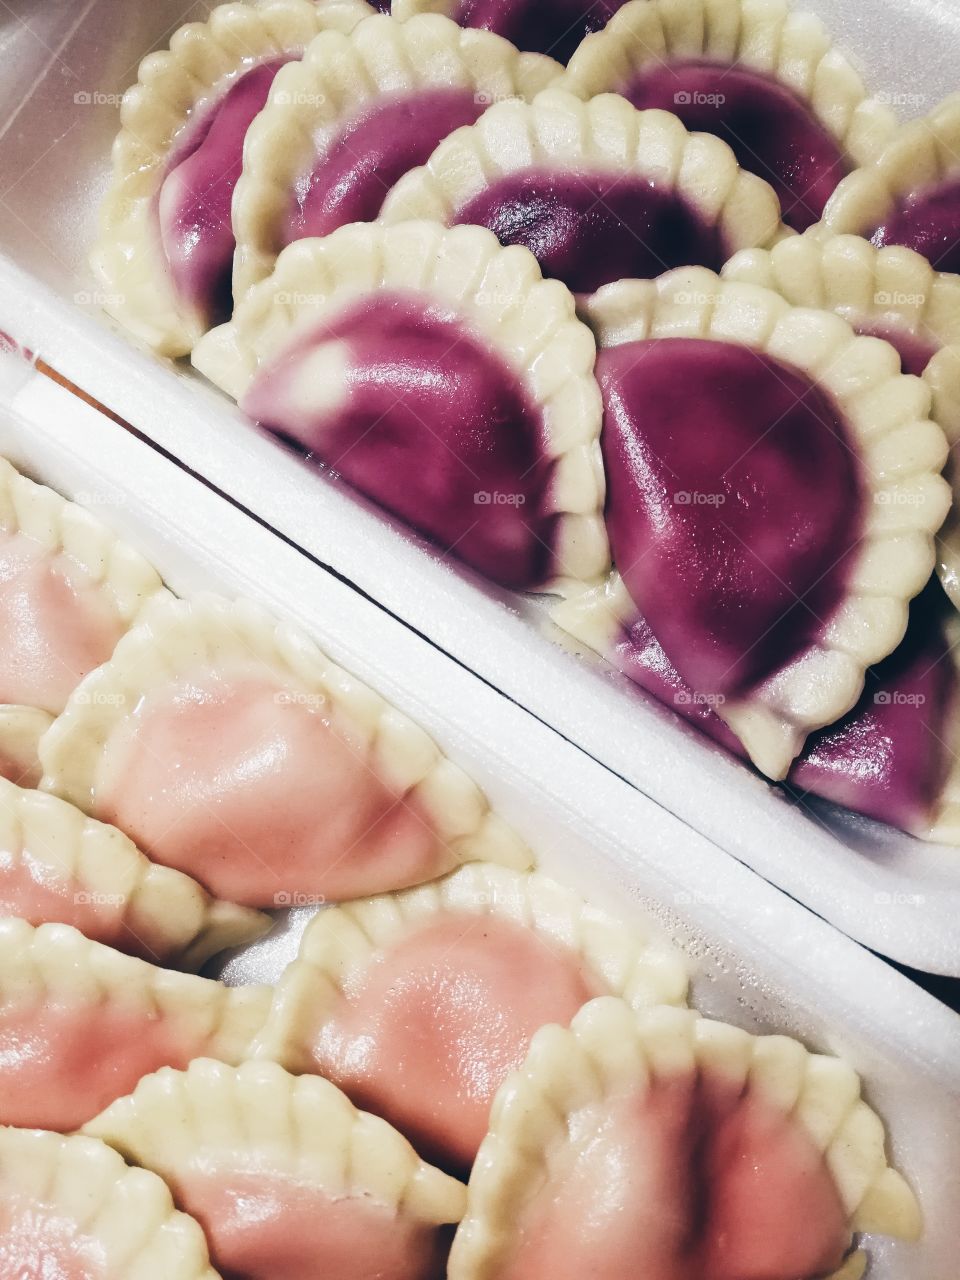 Dumplings filled with berries and strawberries